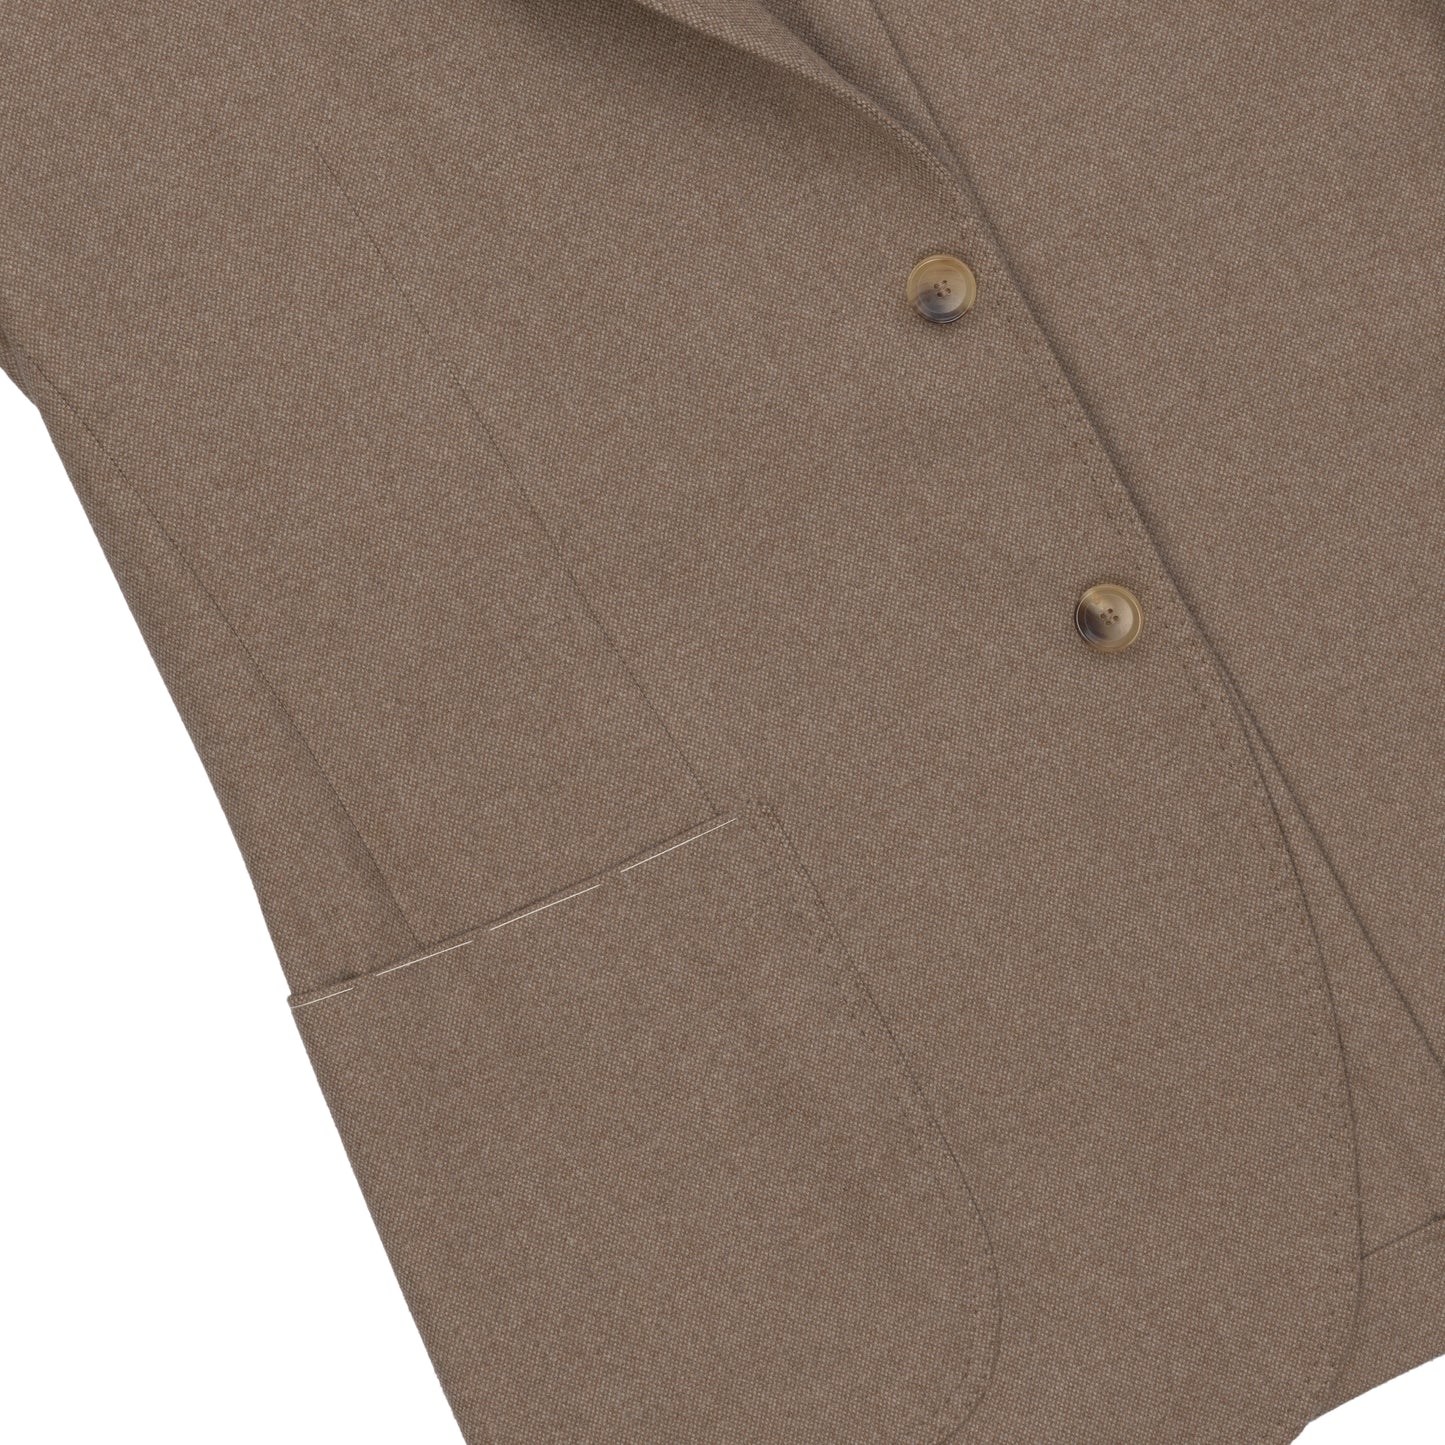 Single-Breasted Cashmere Jacket in Sand Brown. Exclusively Made for Sartale